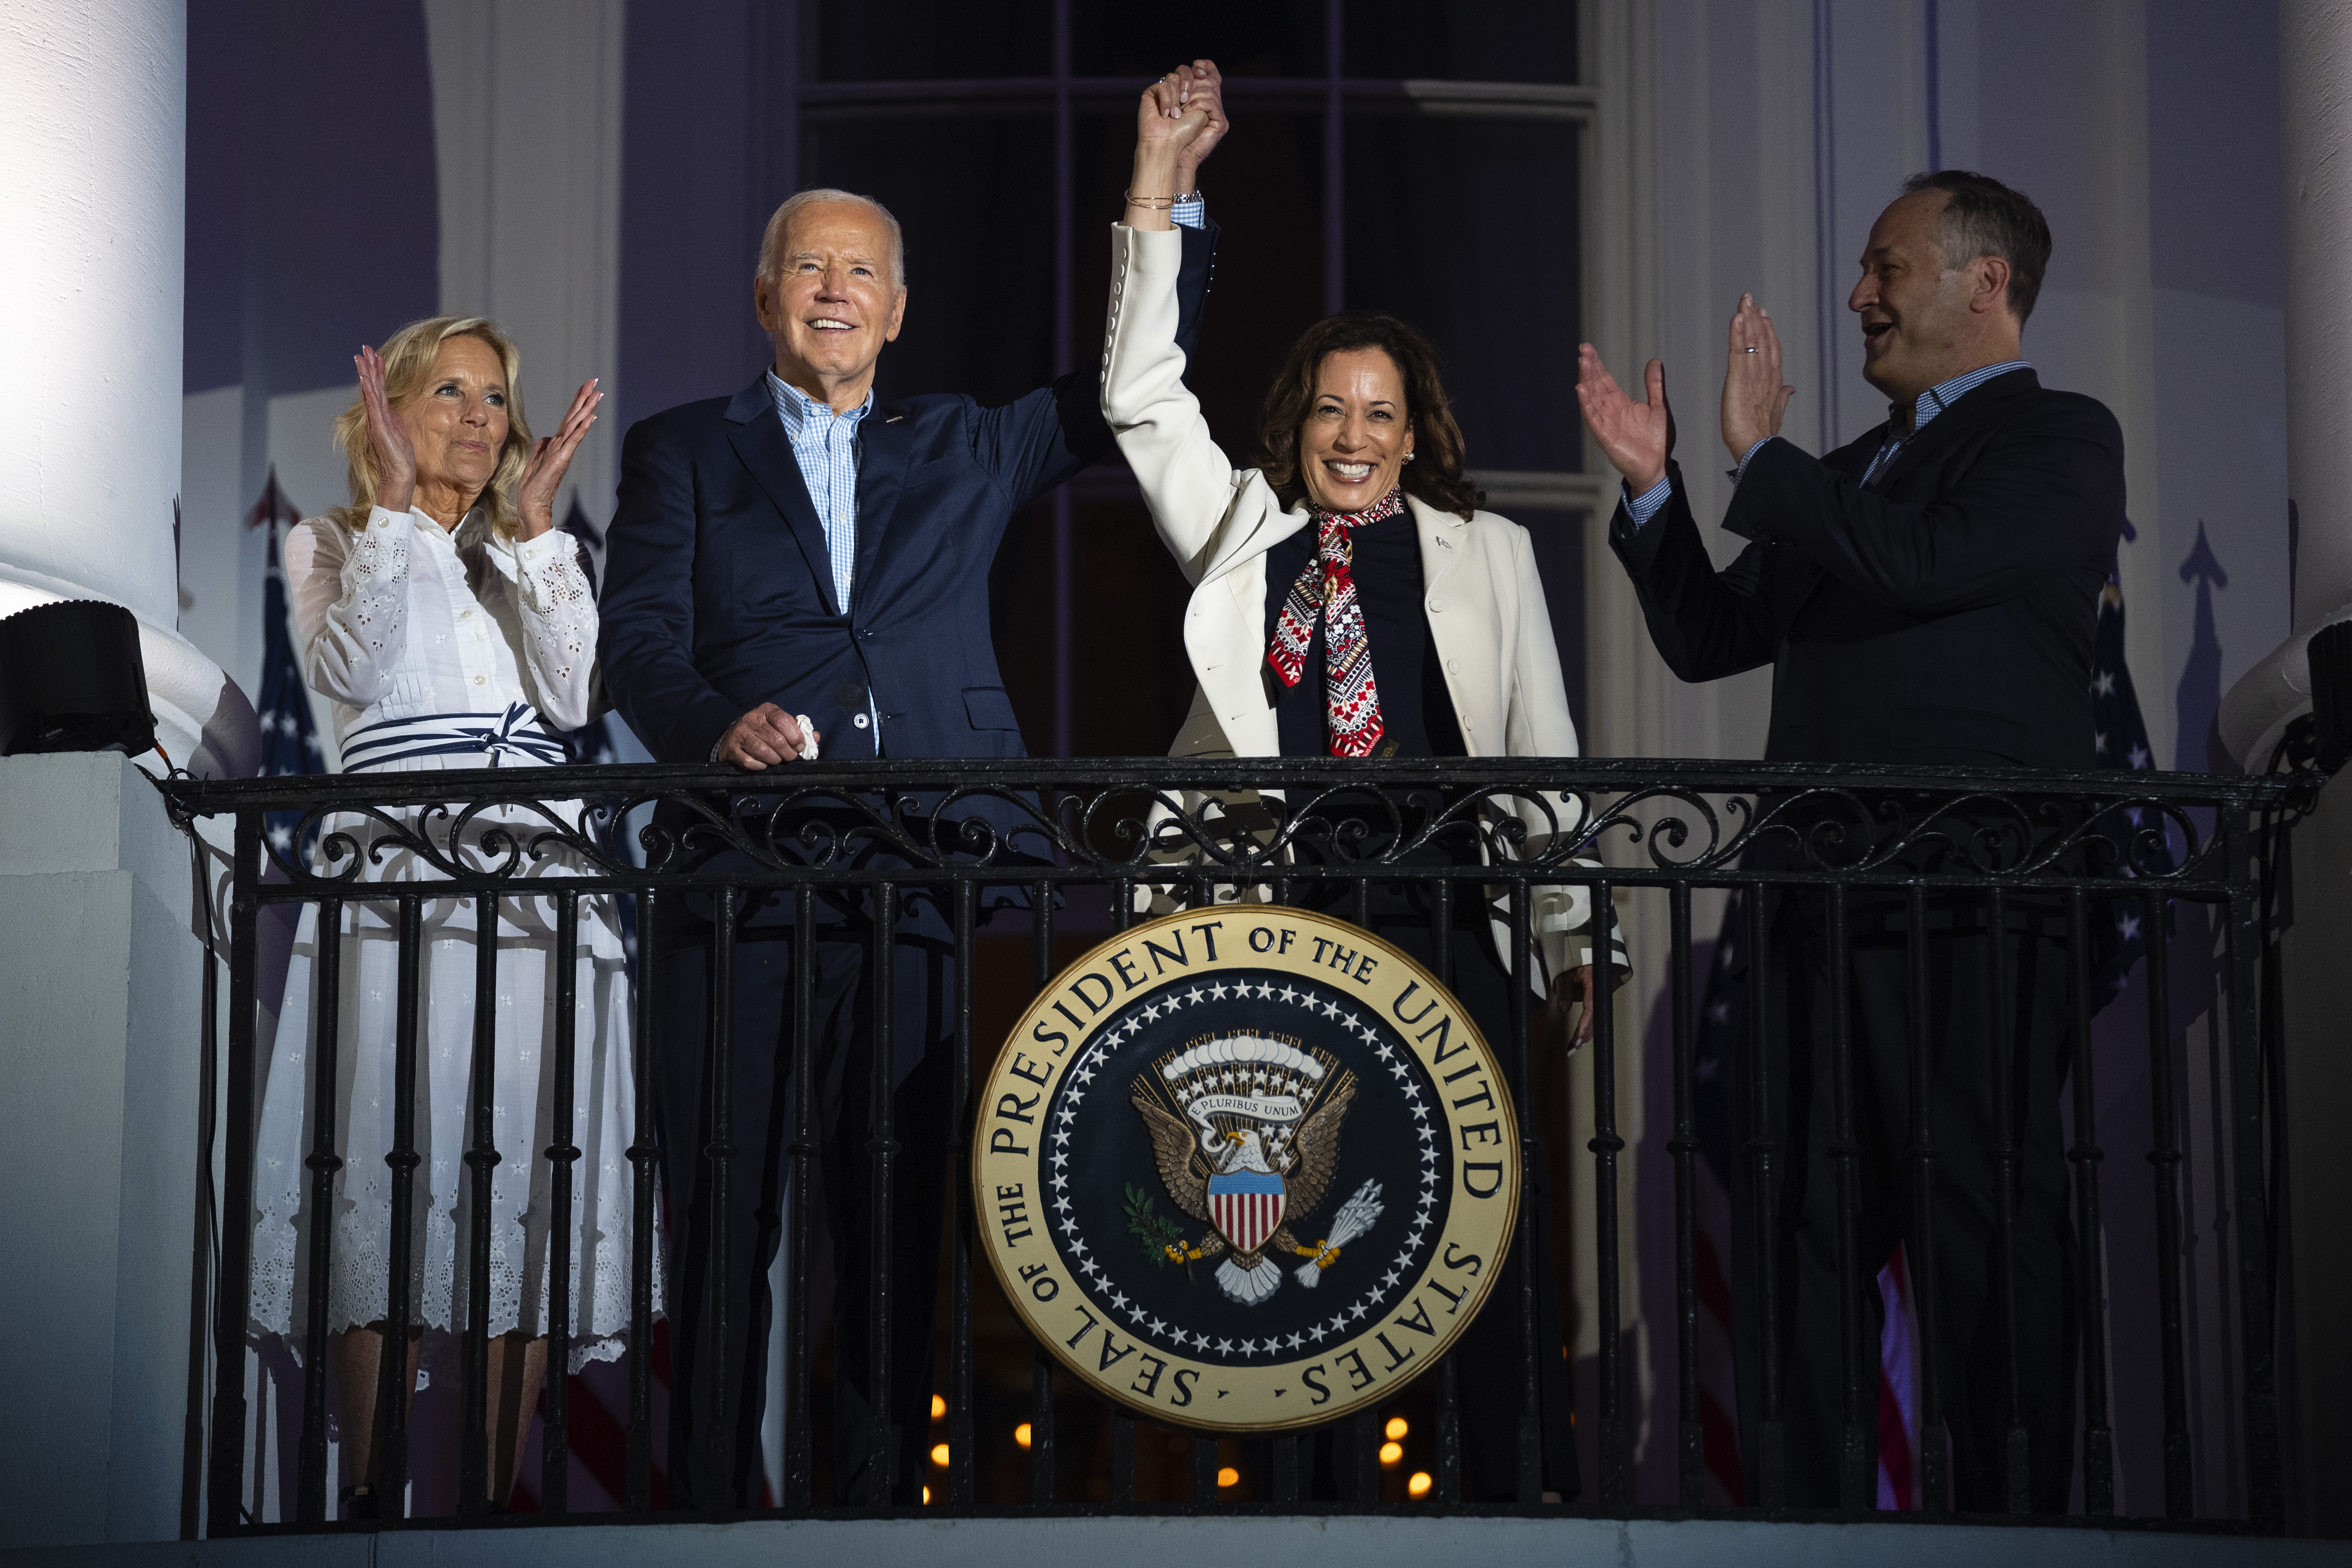 First lady Jill Biden and second gentleman Douglass Emhoff watch as President Joe Biden raises the hand of Vice President Kamala Harris as they view the Independence Day firework display over the National Mall from the balcony of the White House, Thursday, July 4, 2024, in Washington. (AP Photo/Evan Vucci)